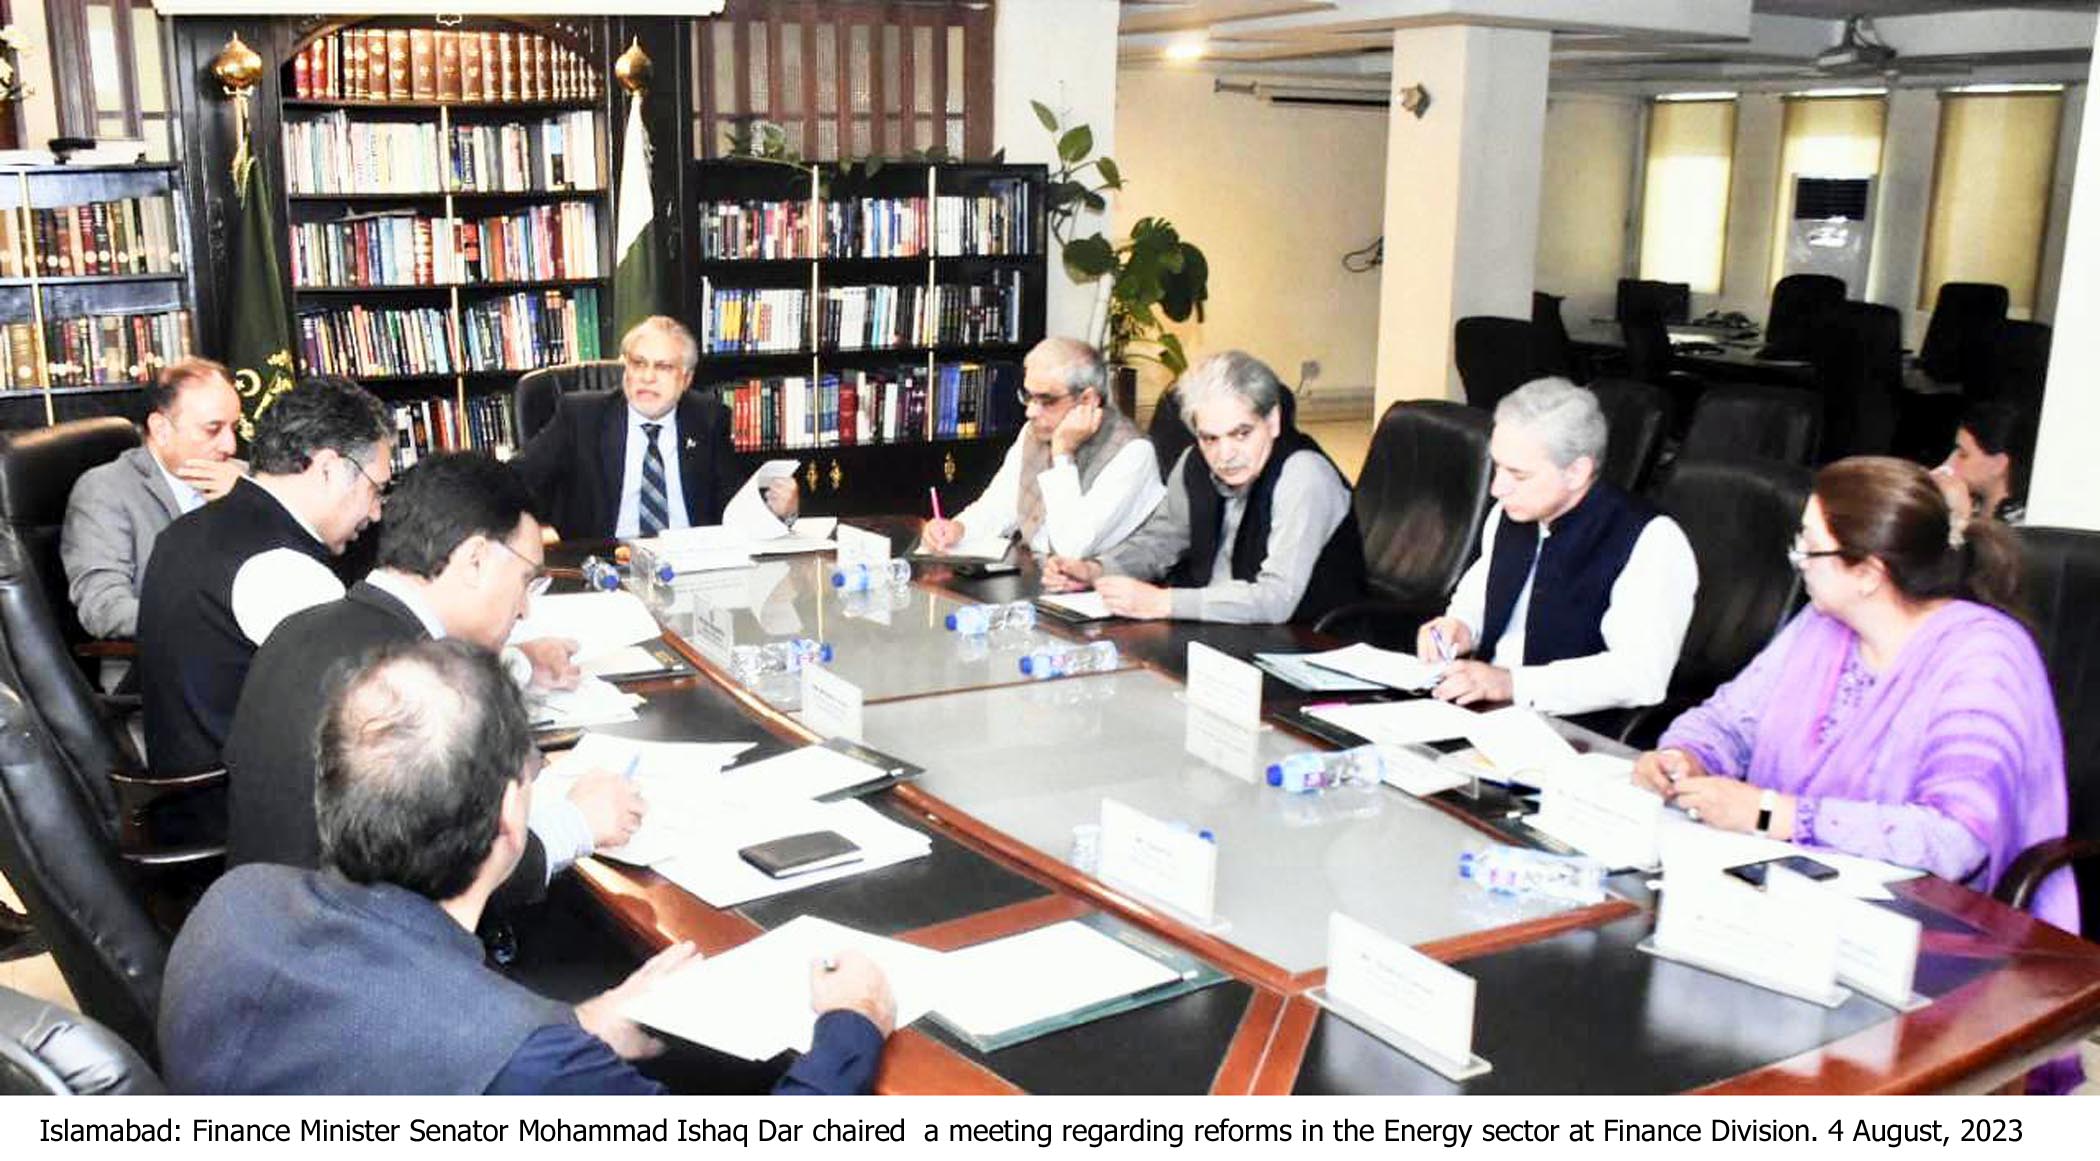 Dar chairs meeting on reforms in energy sector